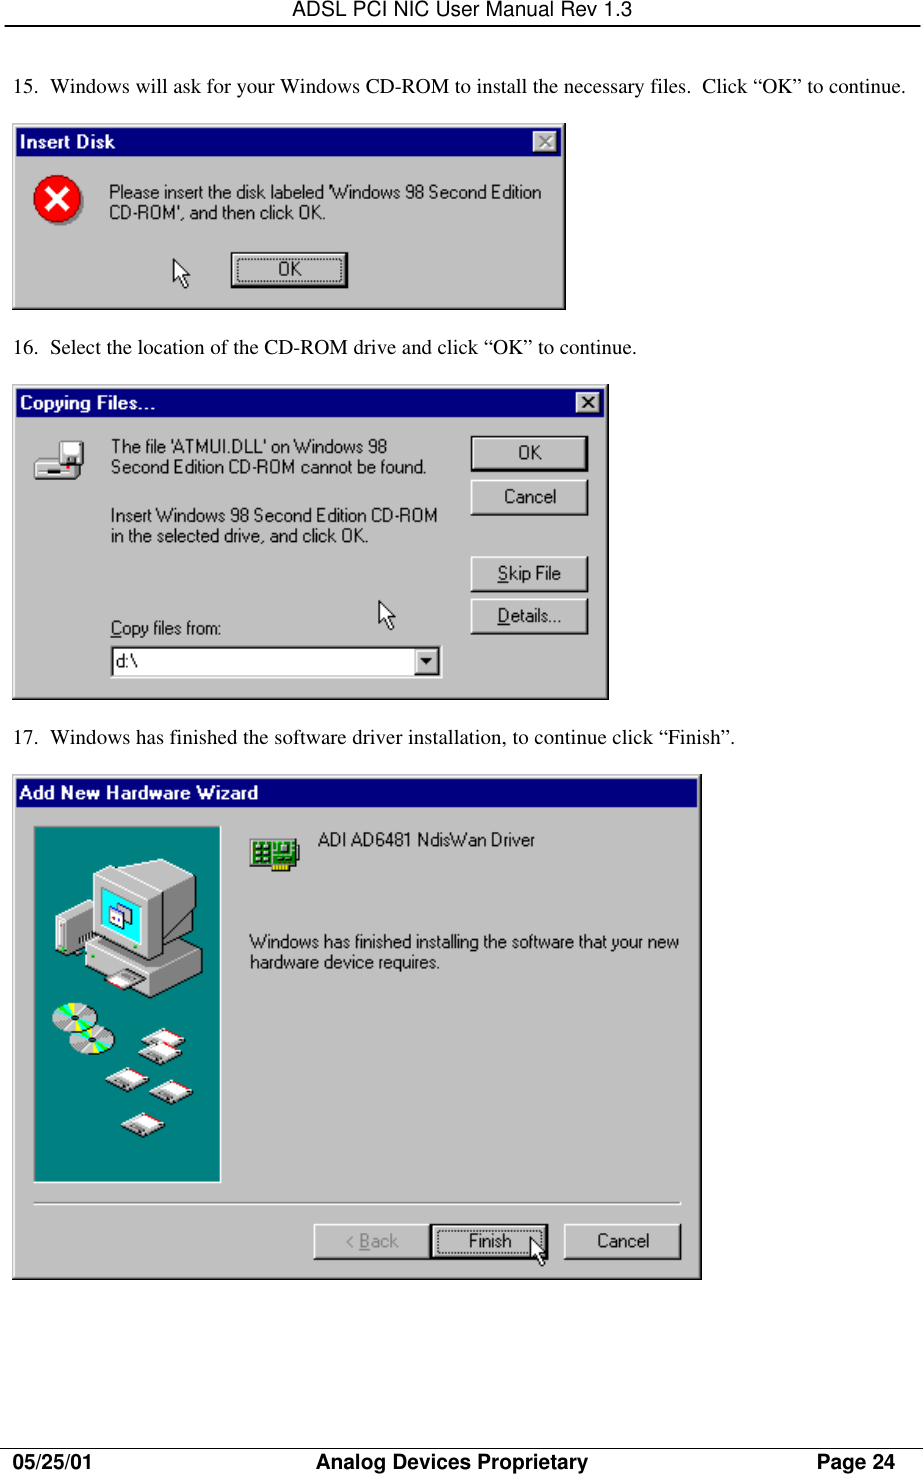 ADSL PCI NIC User Manual Rev 1.305/25/01                                     Analog Devices Proprietary                                      Page 2415. Windows will ask for your Windows CD-ROM to install the necessary files.  Click “OK” to continue.16. Select the location of the CD-ROM drive and click “OK” to continue.17. Windows has finished the software driver installation, to continue click “Finish”.